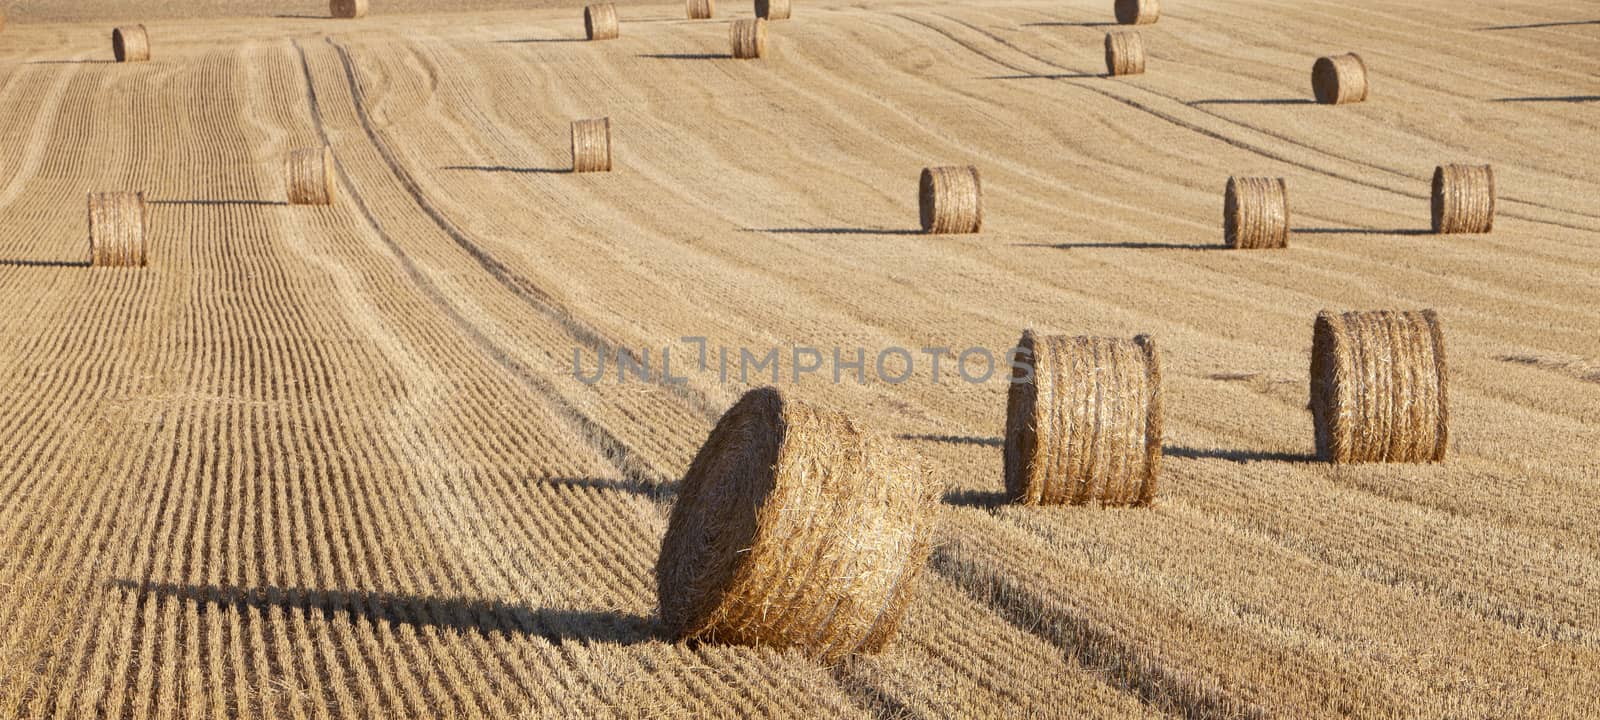 straw bales in rolling hills of northern france under blue sky by ahavelaar